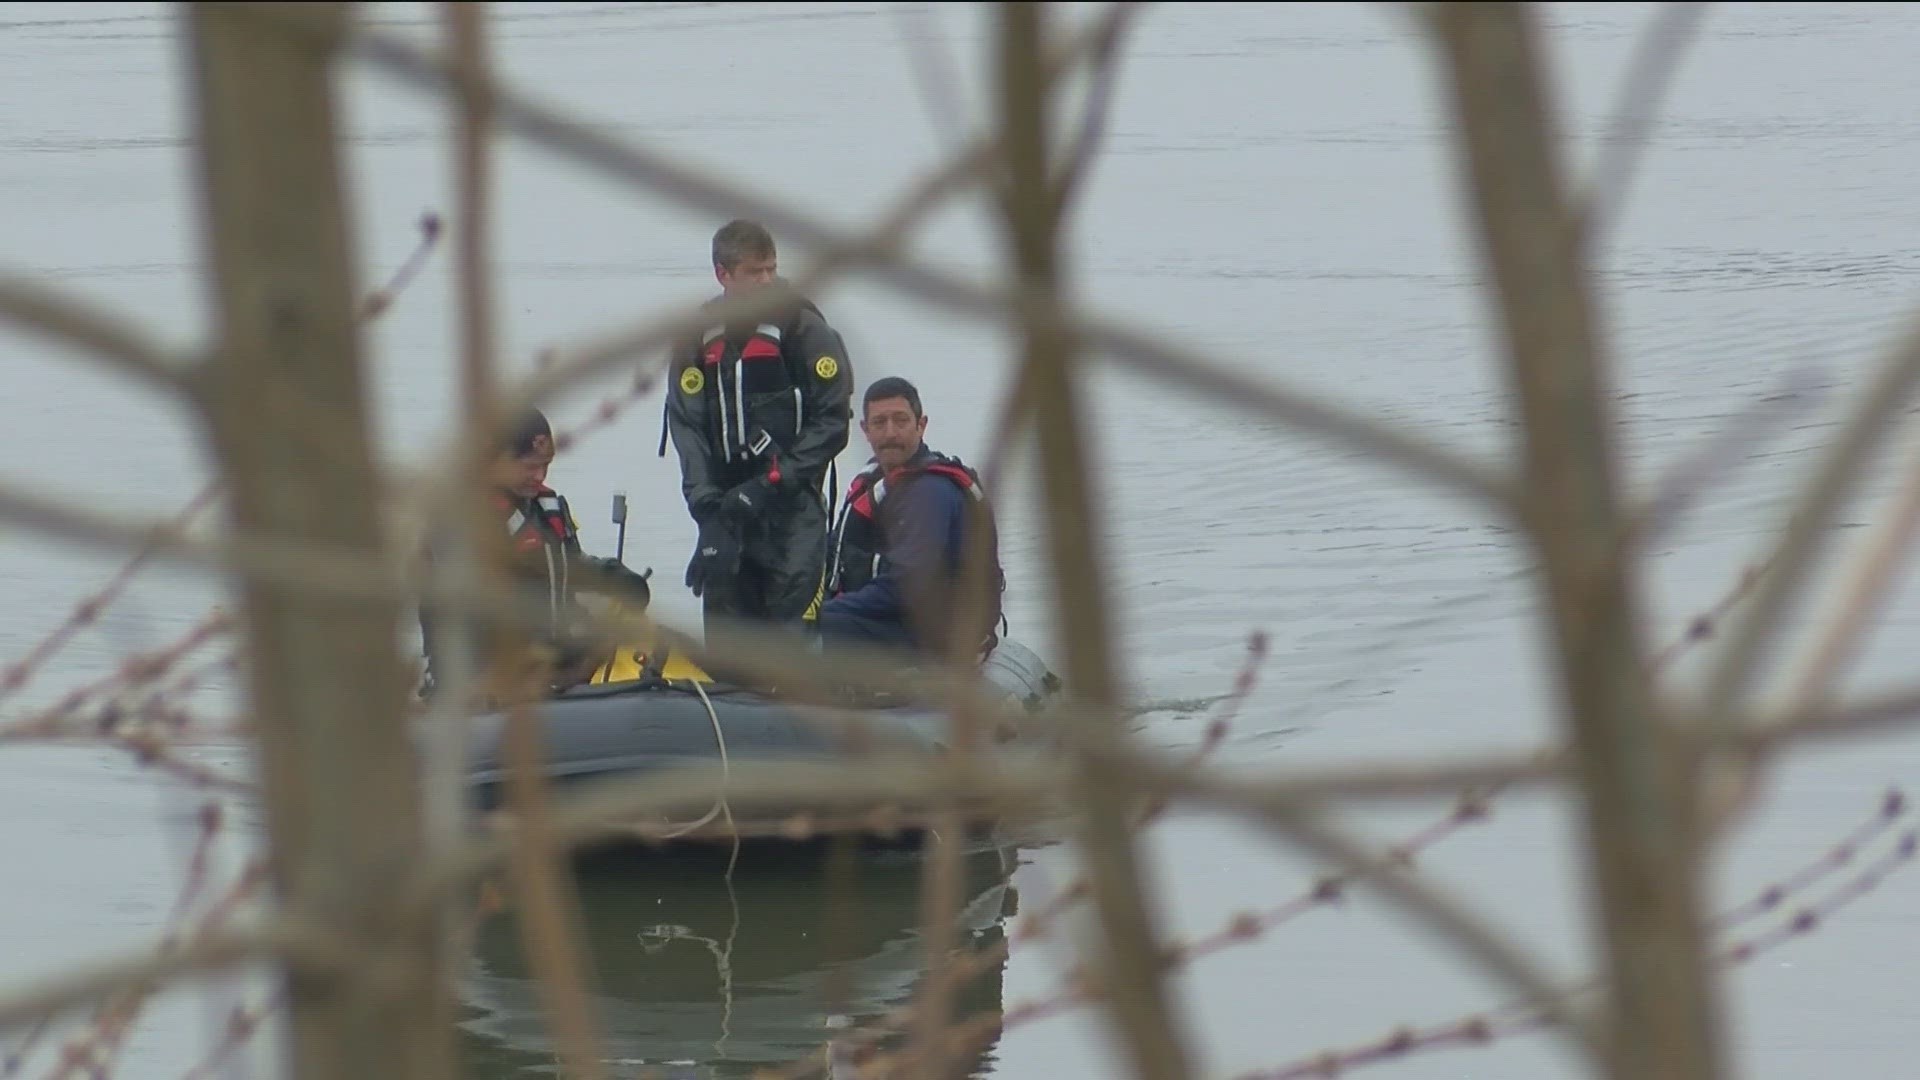 Authorities responded to a water rescue at the National Museum of the Great Lakes shortly before noon on Saturday.